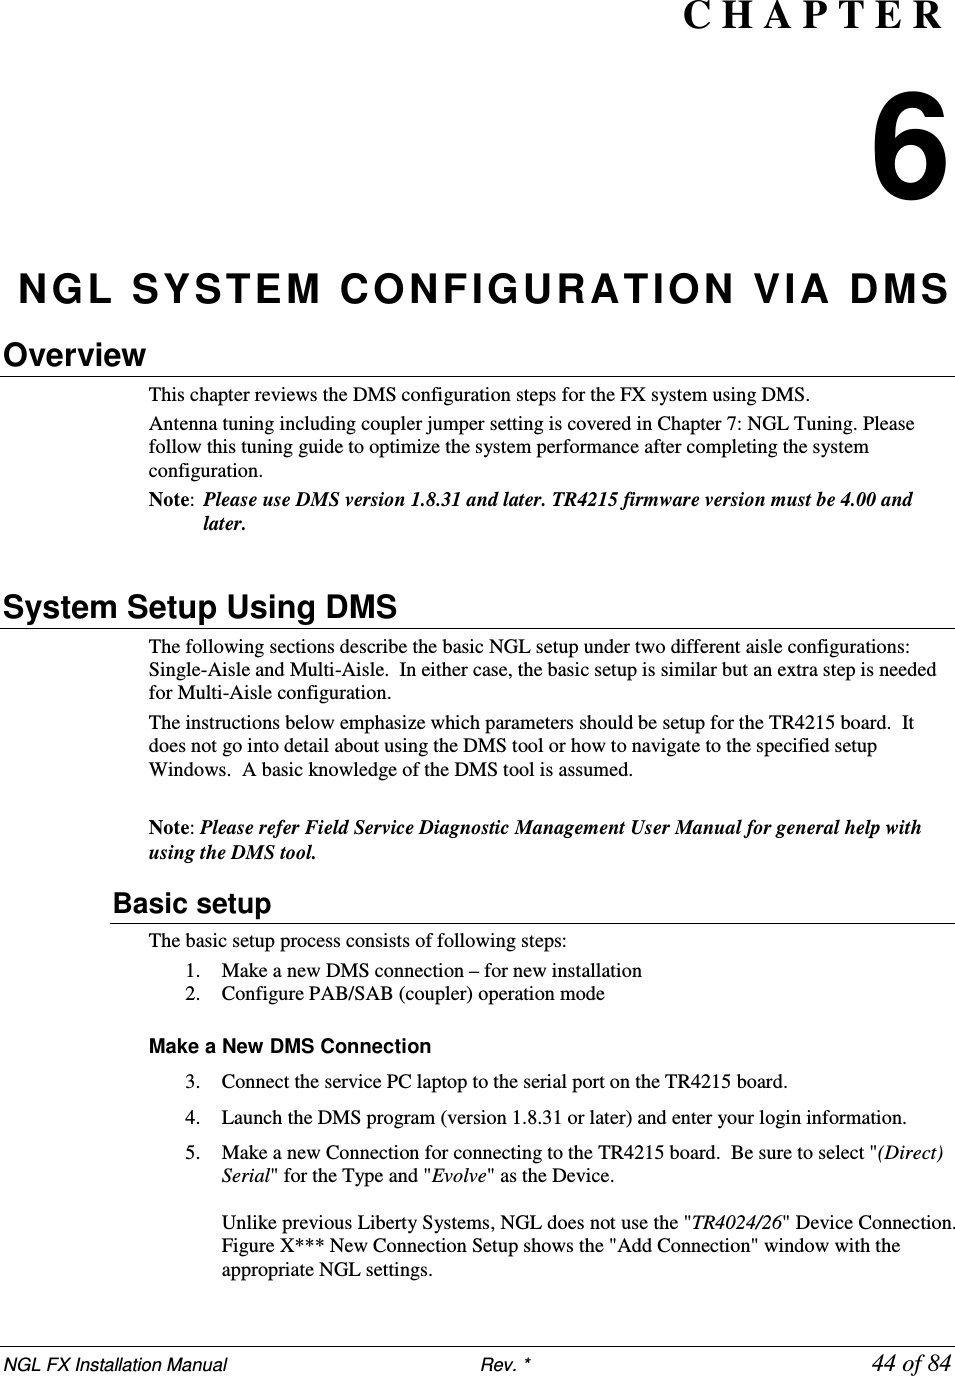 NGL FX Installation Manual                           Rev. *            44 of 84 C H A P T E R  6 NGL SYSTEM  CONFIGURATION VIA DMS Overview This chapter reviews the DMS configuration steps for the FX system using DMS.  Antenna tuning including coupler jumper setting is covered in Chapter 7: NGL Tuning. Please follow this tuning guide to optimize the system performance after completing the system configuration. Note:  Please use DMS version 1.8.31 and later. TR4215 firmware version must be 4.00 and later.  System Setup Using DMS The following sections describe the basic NGL setup under two different aisle configurations: Single-Aisle and Multi-Aisle.  In either case, the basic setup is similar but an extra step is needed for Multi-Aisle configuration. The instructions below emphasize which parameters should be setup for the TR4215 board.  It does not go into detail about using the DMS tool or how to navigate to the specified setup Windows.  A basic knowledge of the DMS tool is assumed.  Note: Please refer Field Service Diagnostic Management User Manual for general help with using the DMS tool. Basic setup The basic setup process consists of following steps: 1. Make a new DMS connection – for new installation 2. Configure PAB/SAB (coupler) operation mode  Make a New DMS Connection 3. Connect the service PC laptop to the serial port on the TR4215 board. 4. Launch the DMS program (version 1.8.31 or later) and enter your login information.  5. Make a new Connection for connecting to the TR4215 board.  Be sure to select &quot;(Direct) Serial&quot; for the Type and &quot;Evolve&quot; as the Device.   Unlike previous Liberty Systems, NGL does not use the &quot;TR4024/26&quot; Device Connection.   Figure X*** New Connection Setup shows the &quot;Add Connection&quot; window with the appropriate NGL settings. 